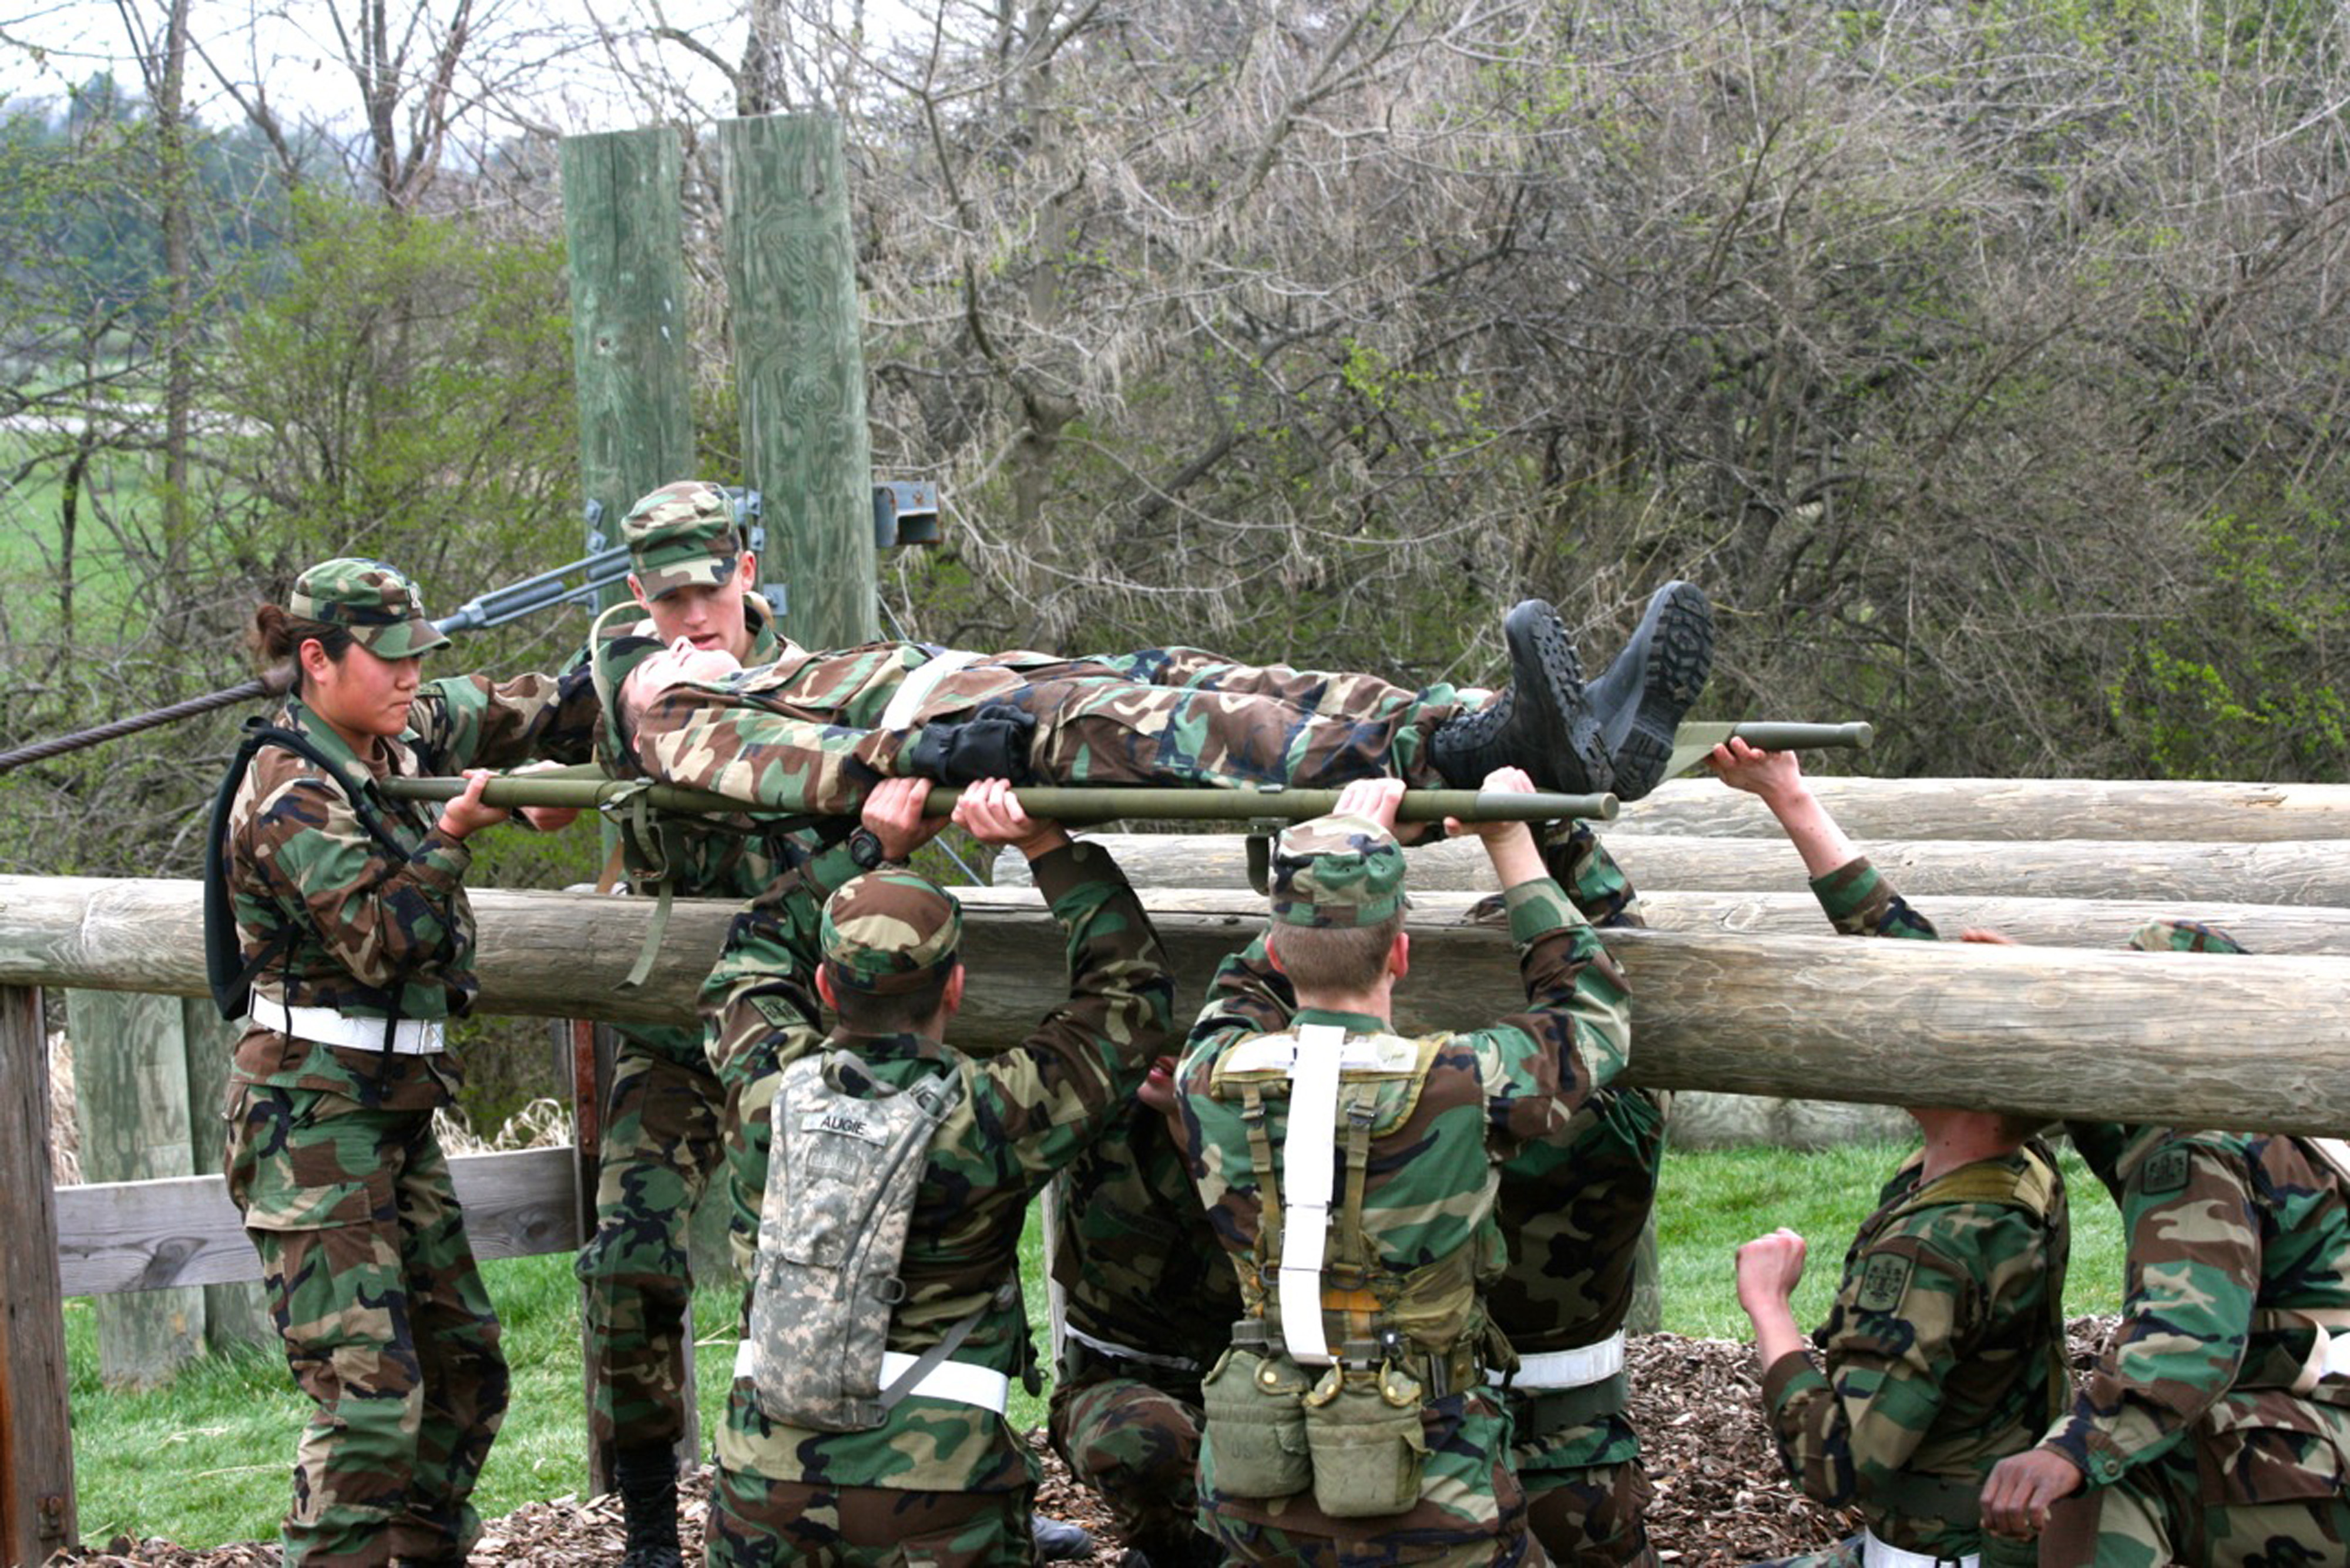 Members of the Virginia Tech Corps of Cadets navigating an obstacle in the Annual Squad Tactical Challenge in 2011